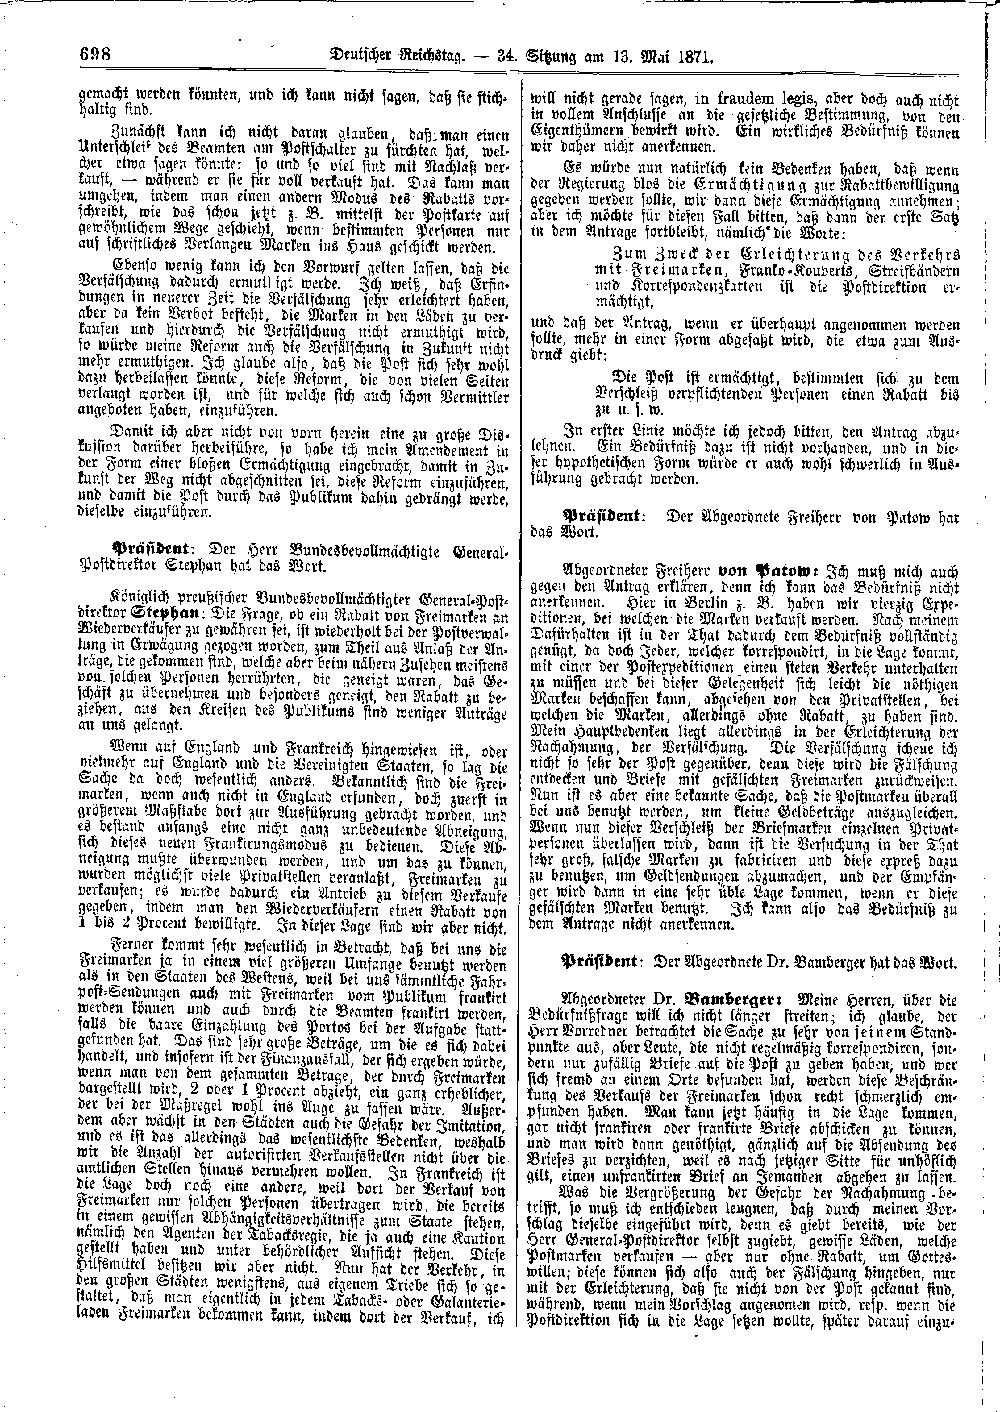 Scan of page 698